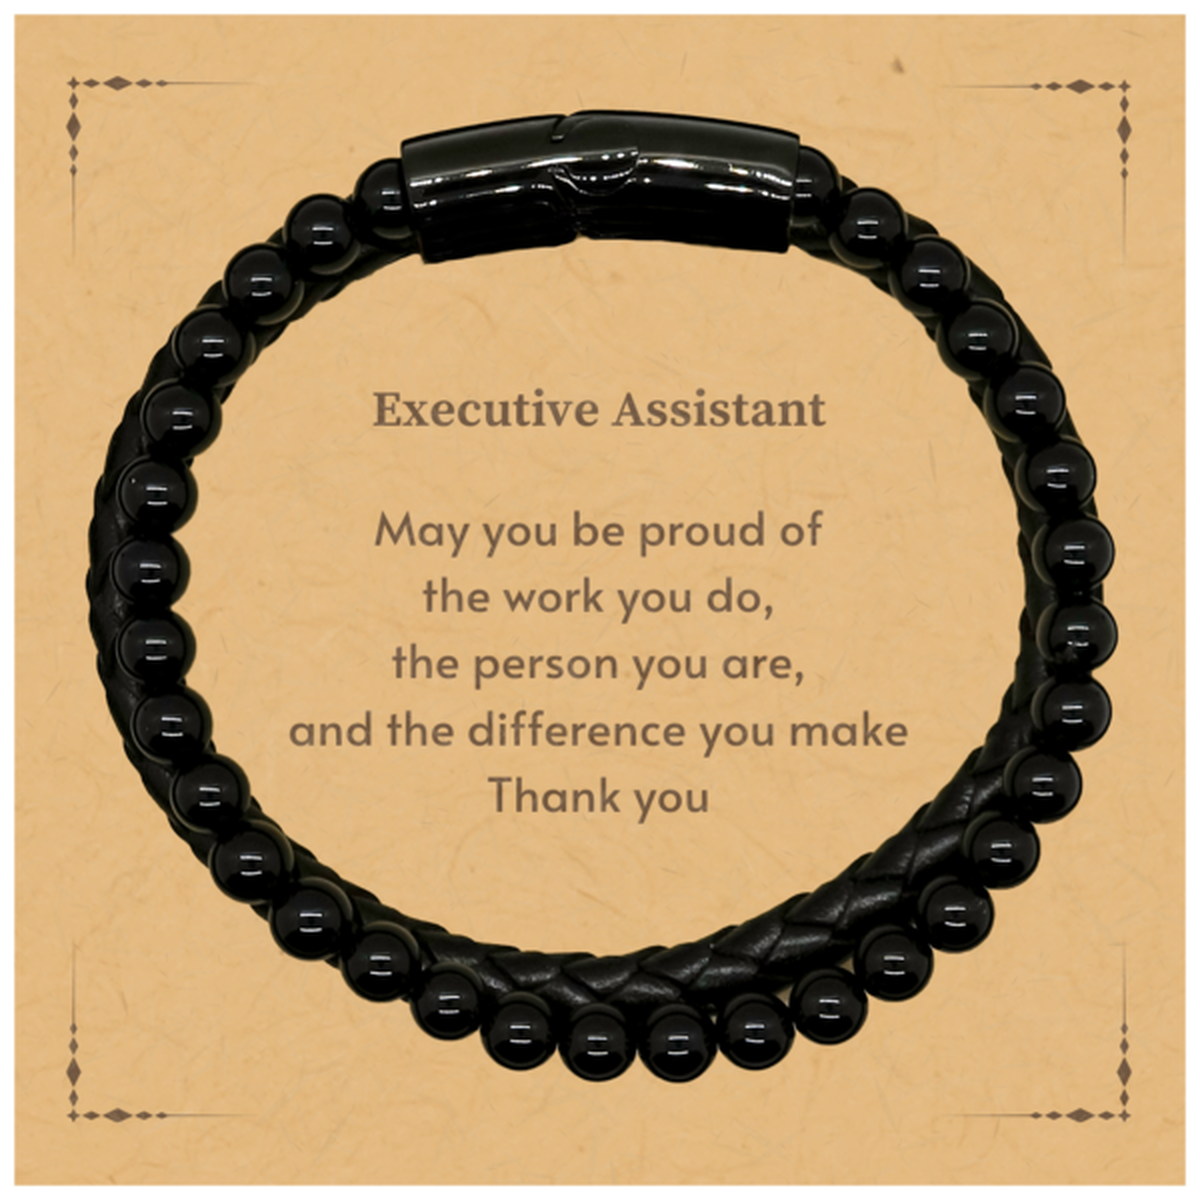 Heartwarming Stone Leather Bracelets Retirement Coworkers Gifts for Executive Assistant, Executive Assistant May You be proud of the work you do, the person you are Gifts for Boss Men Women Friends